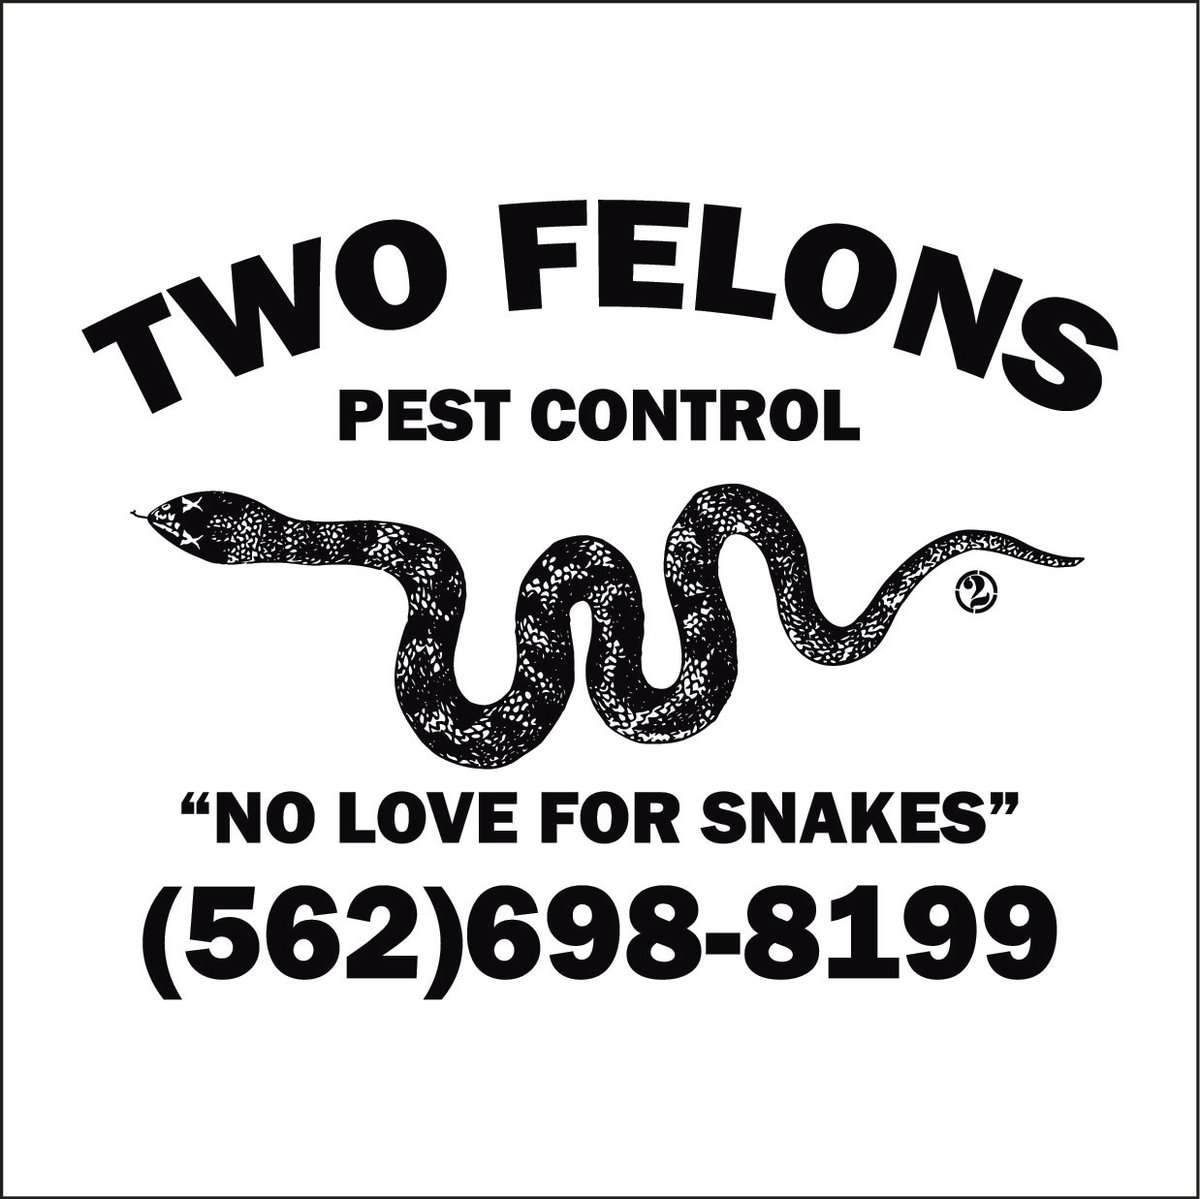 Two Felons Pest Control "SNAKES" White